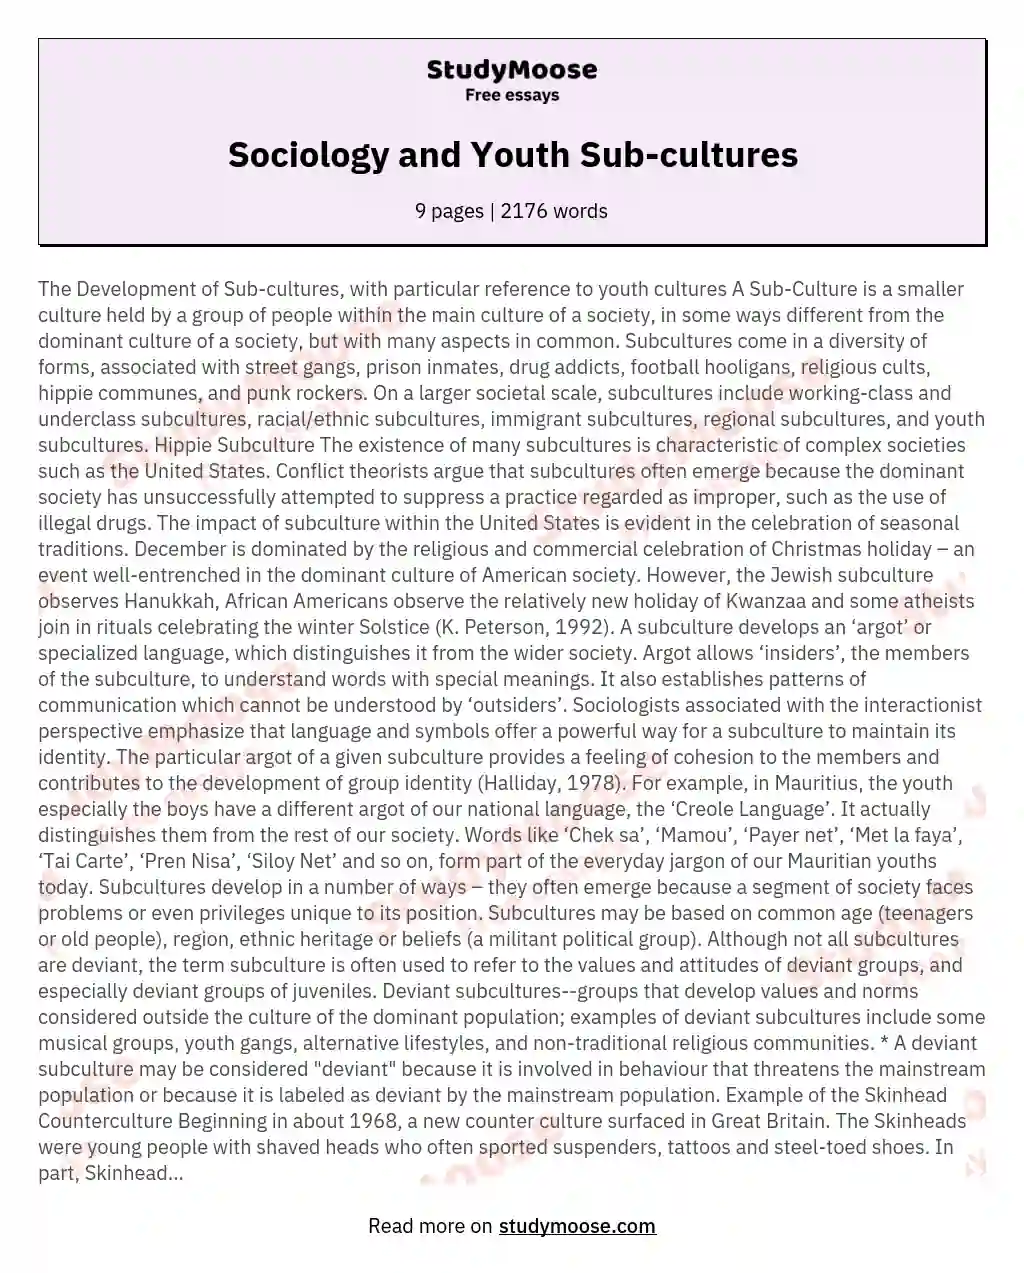 Sociology and Youth Sub-cultures essay